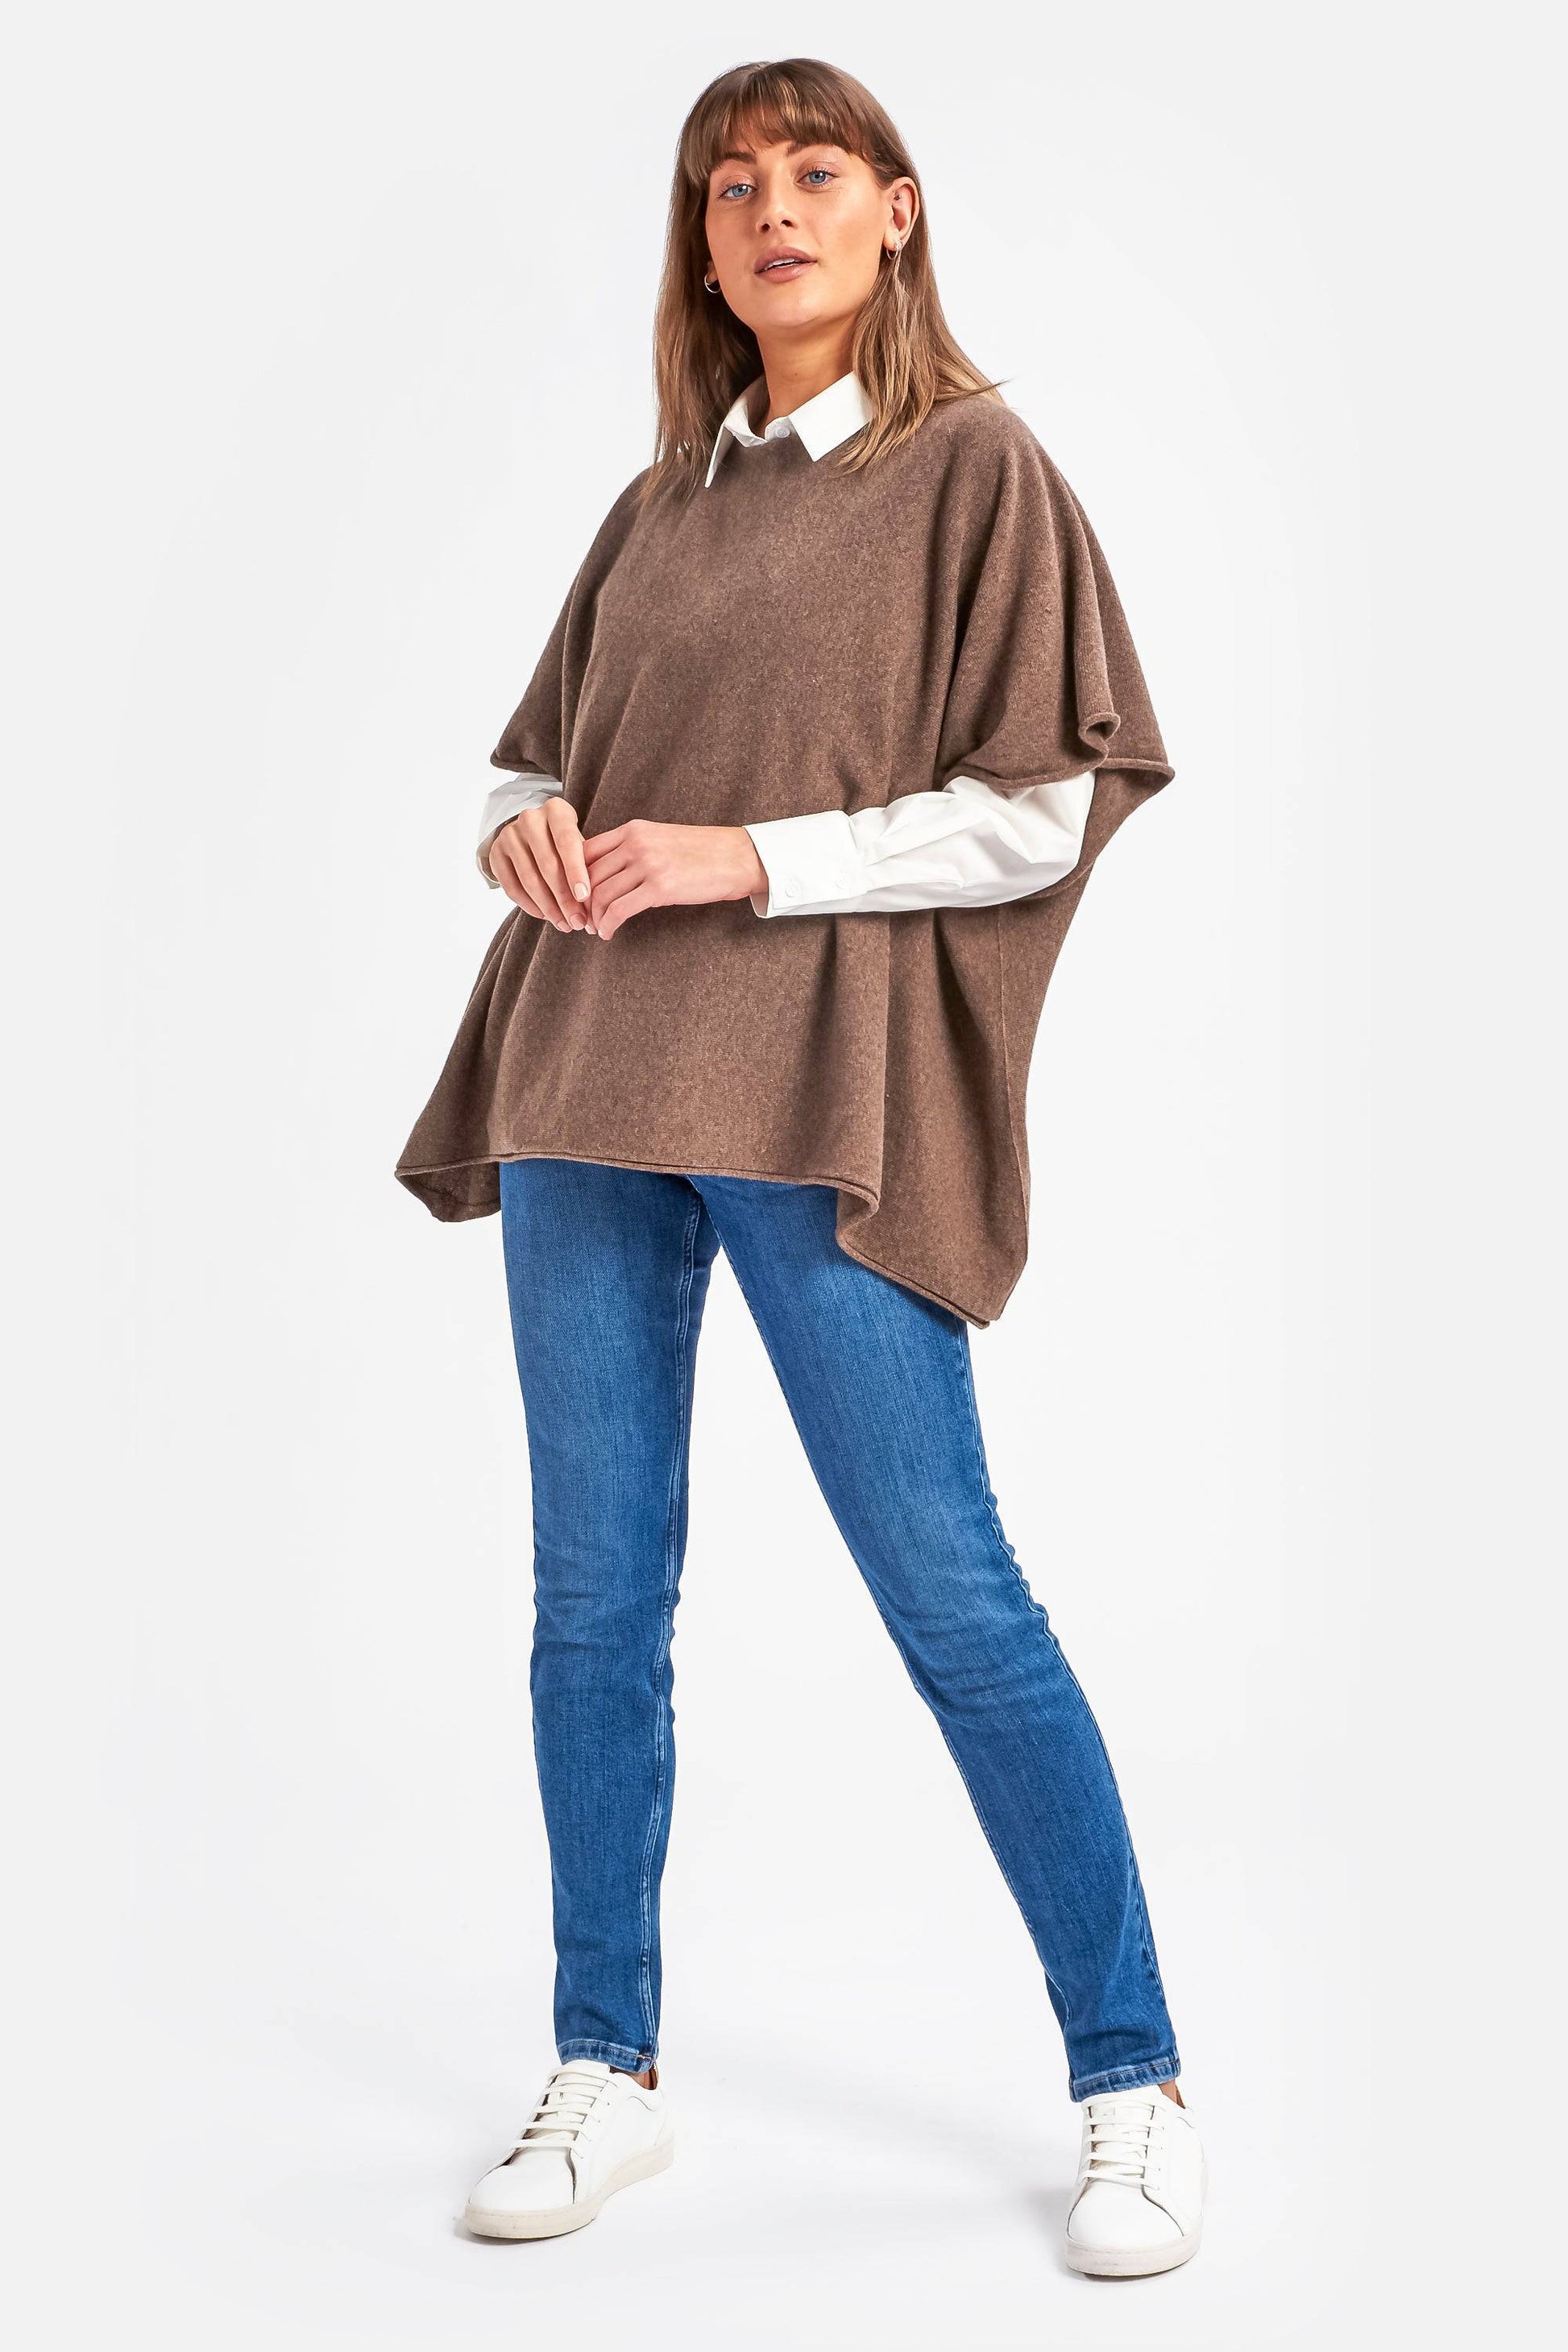 Cashmere & Merino Wool Boat Neck Poncho in Brown By Woodcock & Cavendish for sale - Woodcock and Cavendish